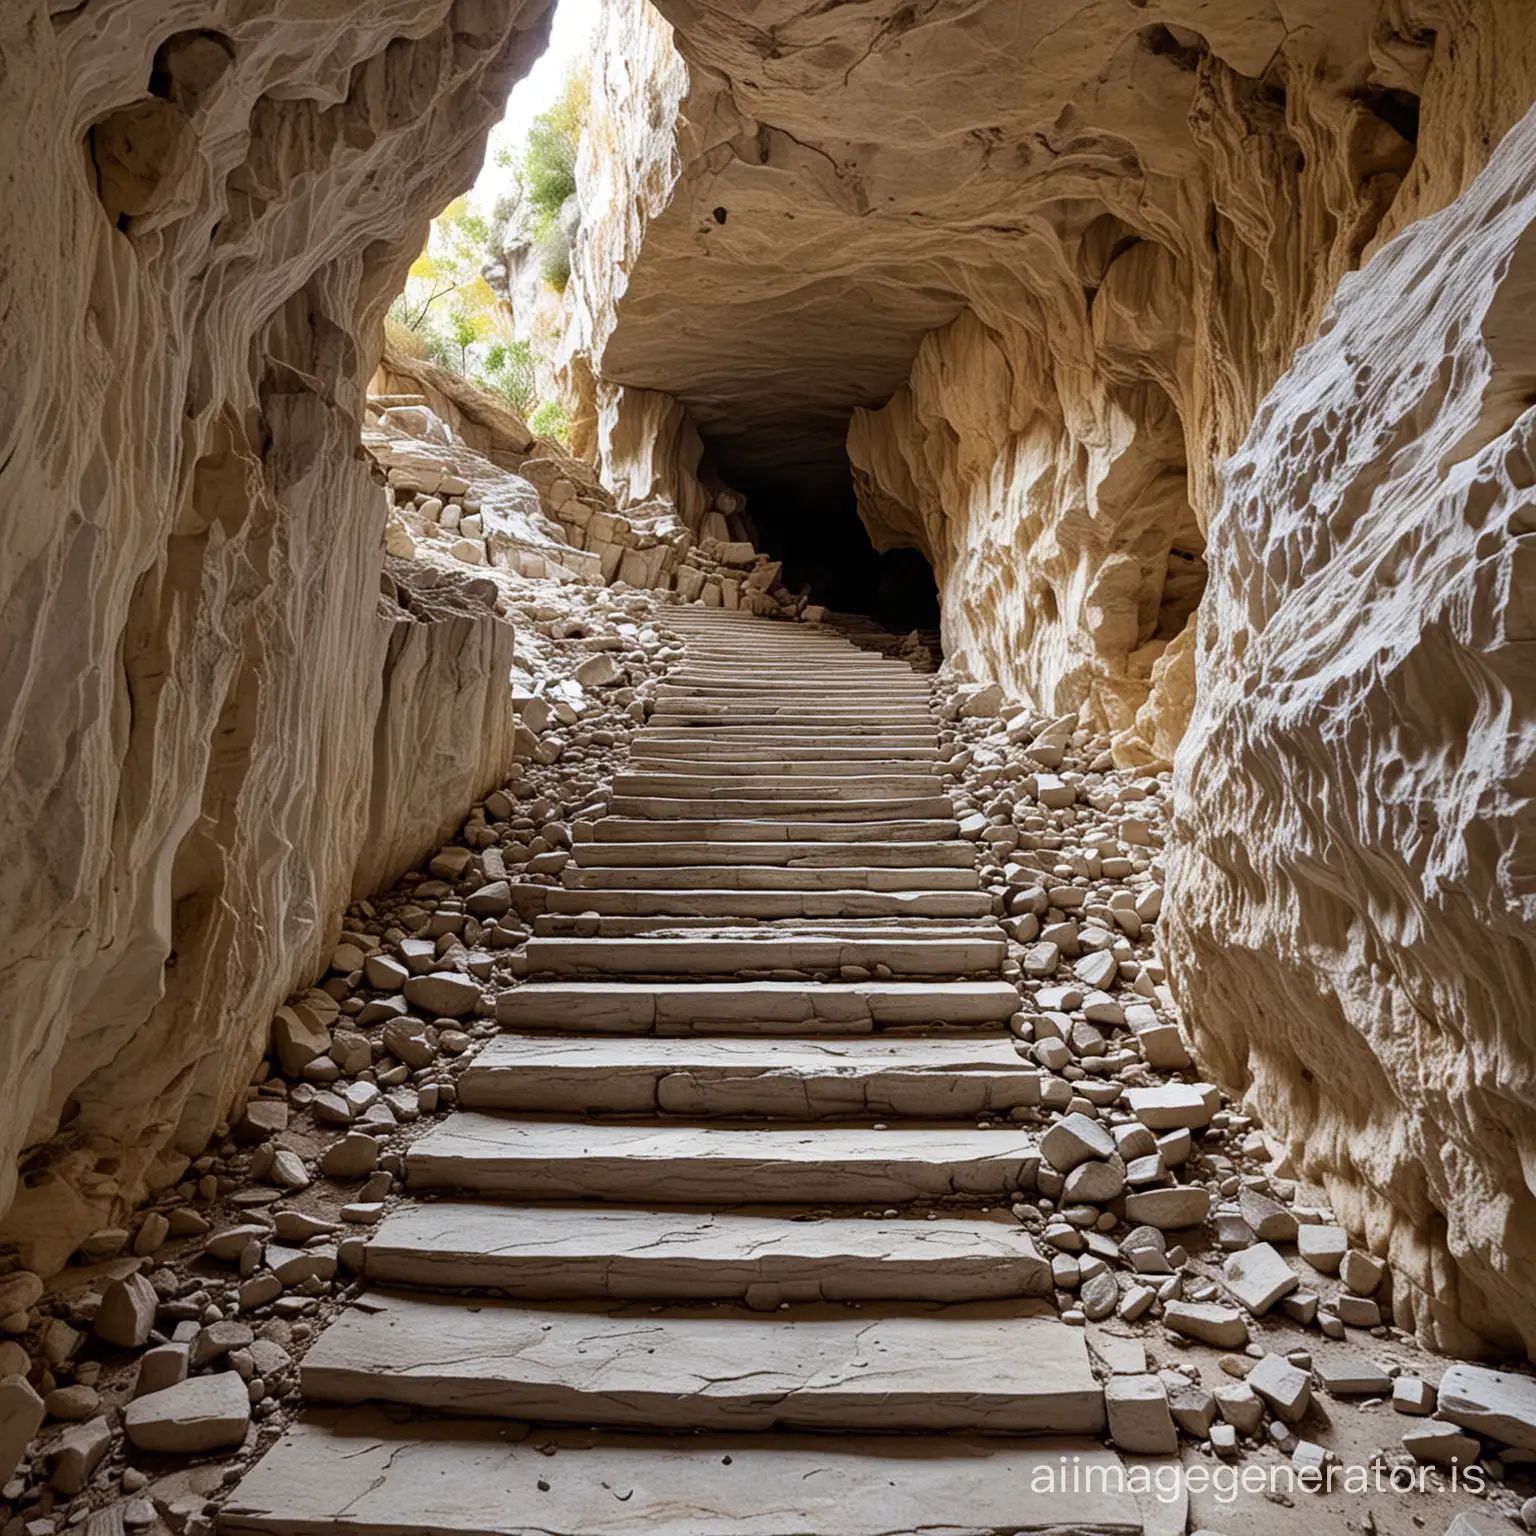 Stunning-Marble-Steps-Leading-to-a-Mysterious-Cave-Entrance